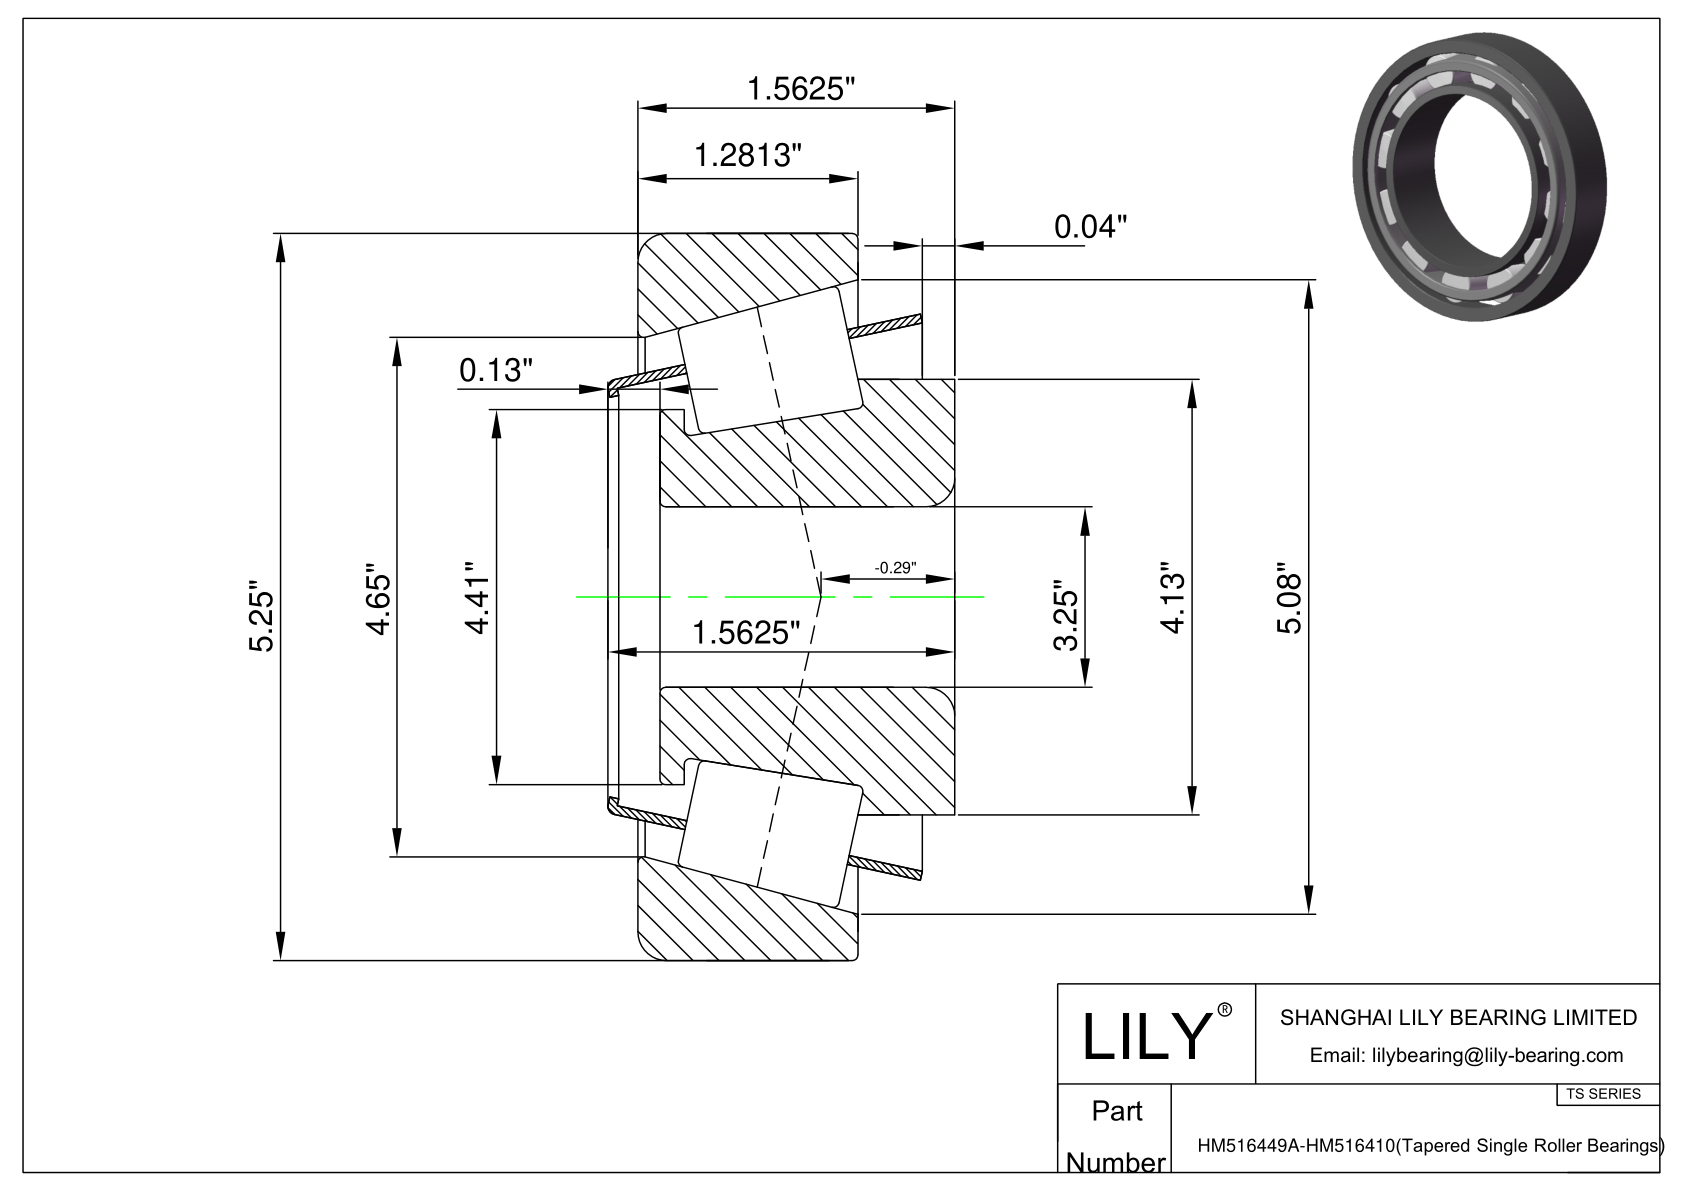 HM516449A-HM516410 TS (Tapered Single Roller Bearings) (Imperial) cad drawing